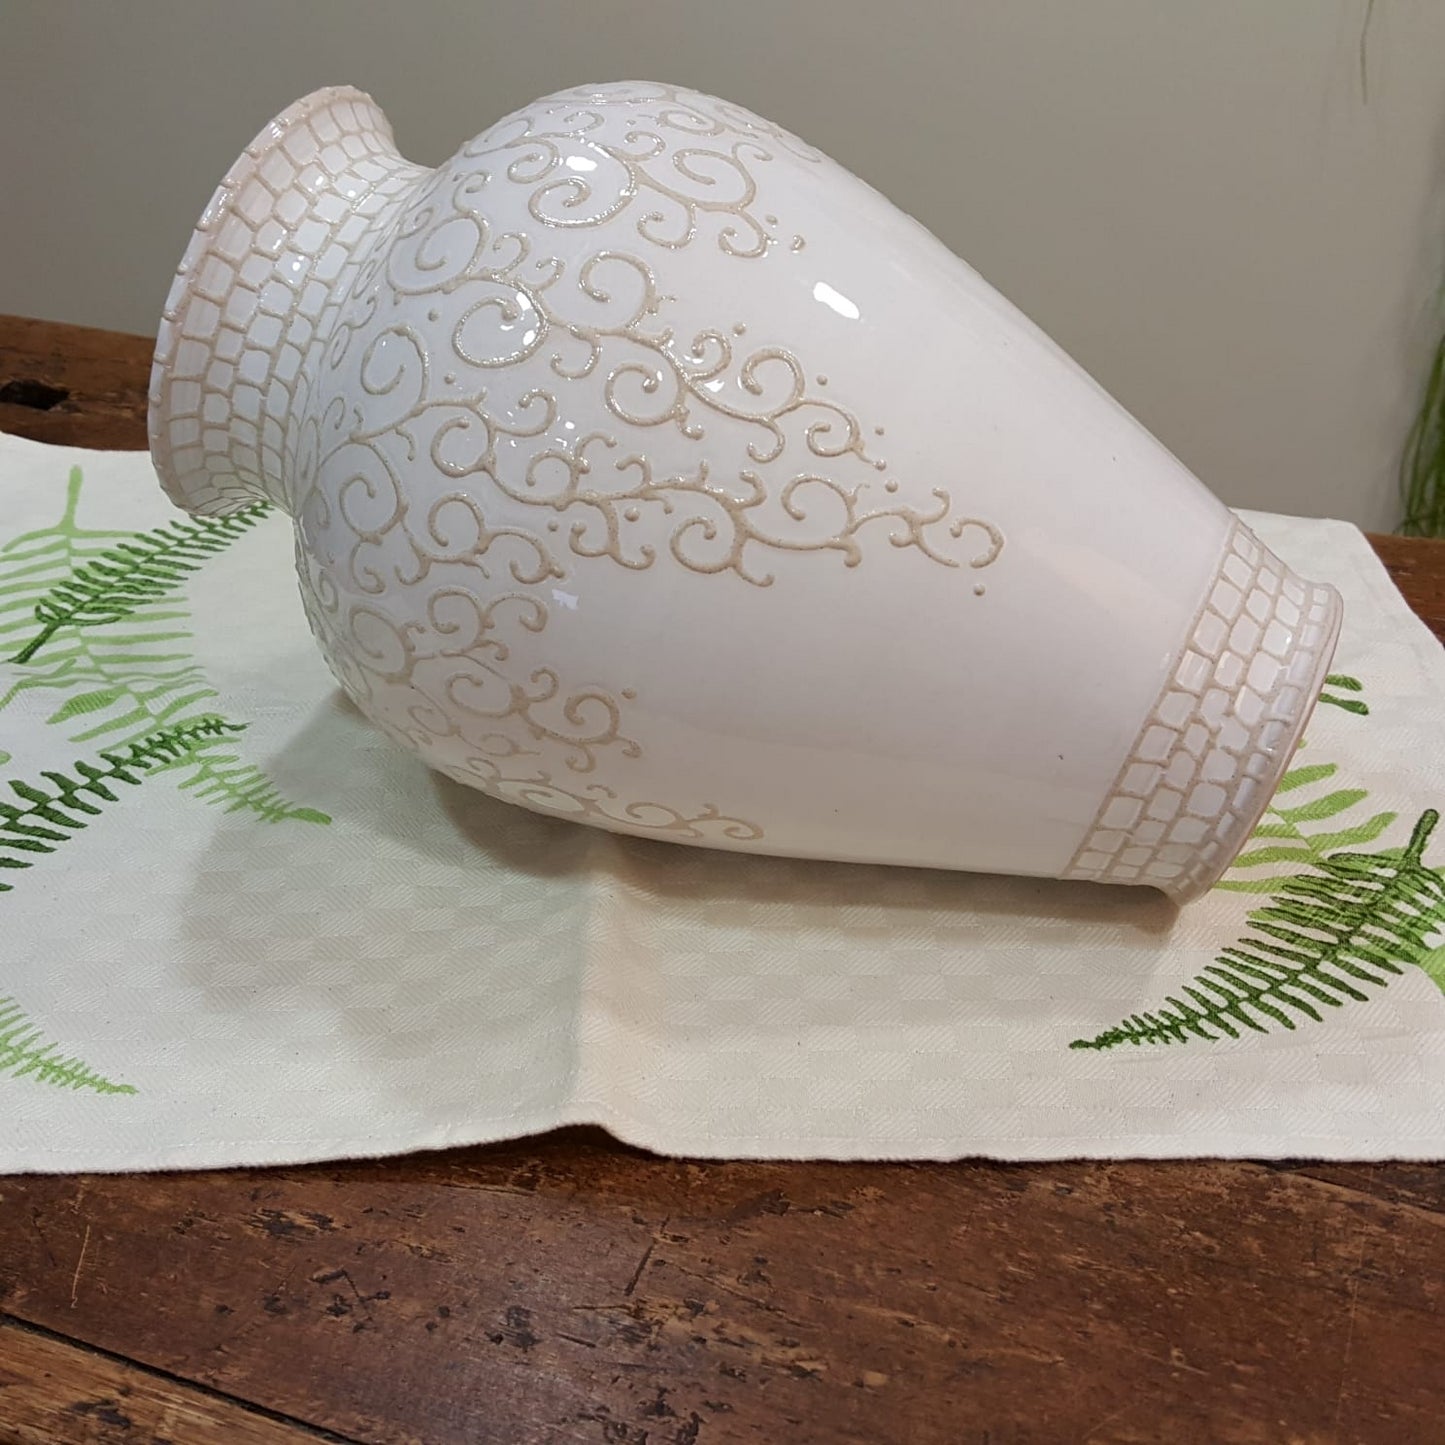 Ceramic vase with embroidery decoration